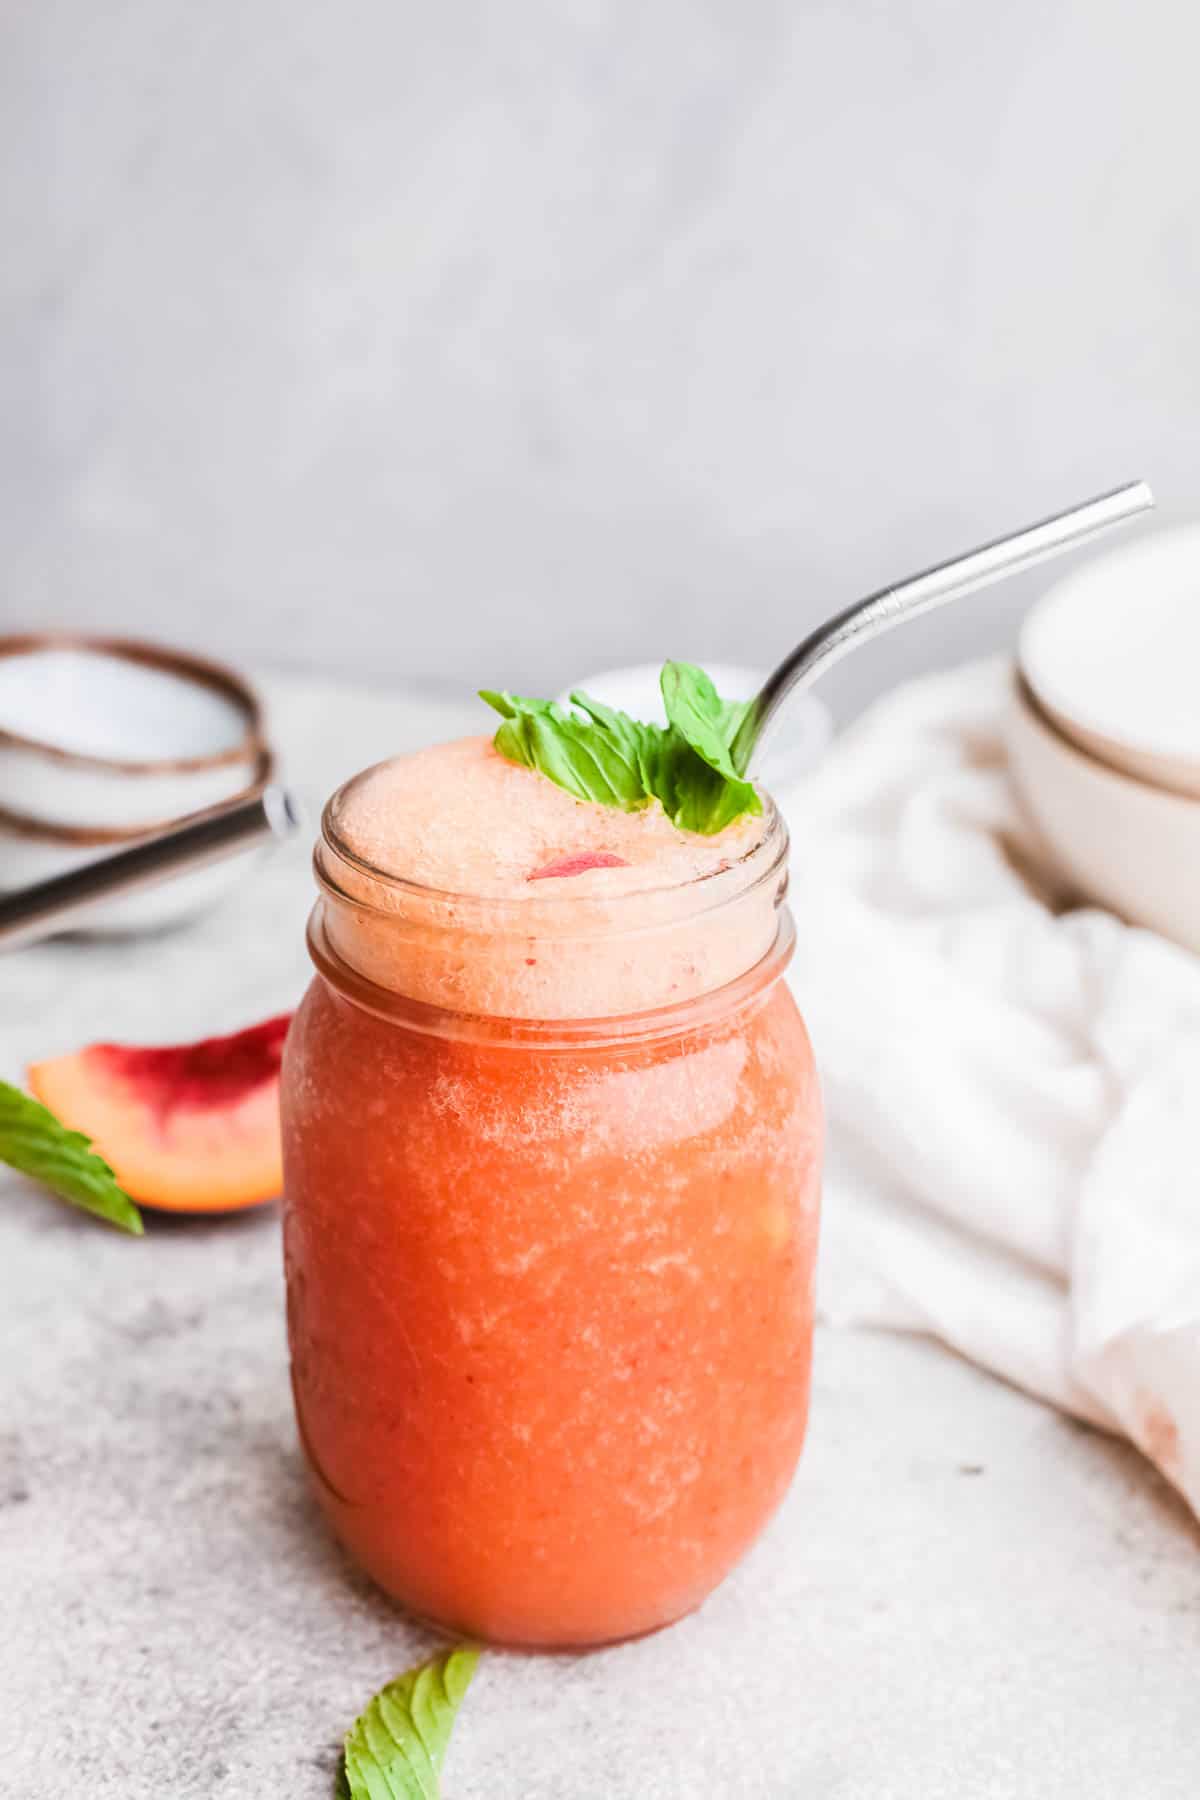 Peach Froze served in a jar garnished with fresh mint and a metal straw.